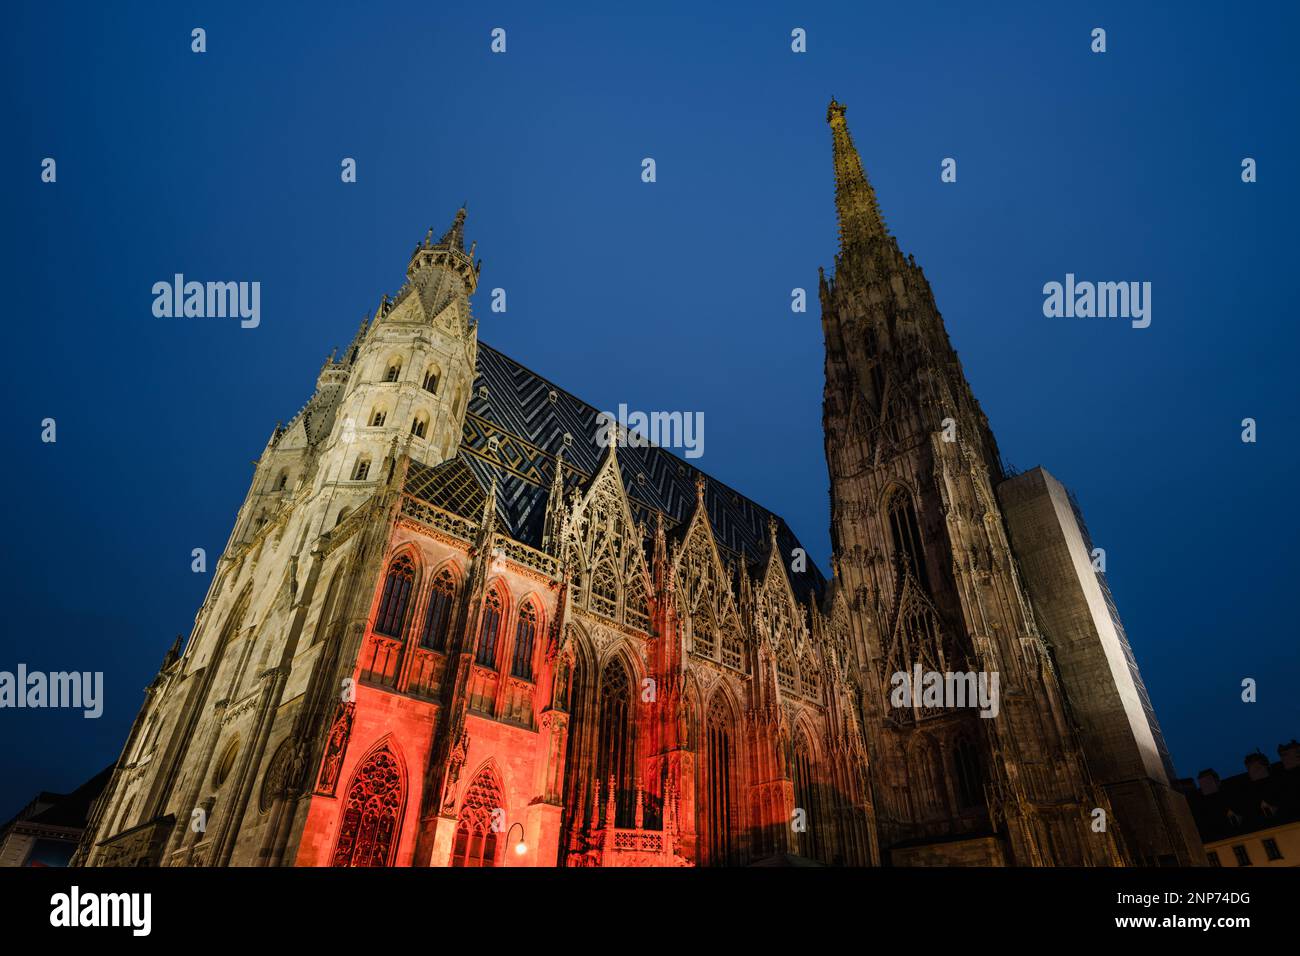 Saint Stephen's Cathedral in Vienna, Austria Illuminated at Night, also called Stephansdom Stock Photo